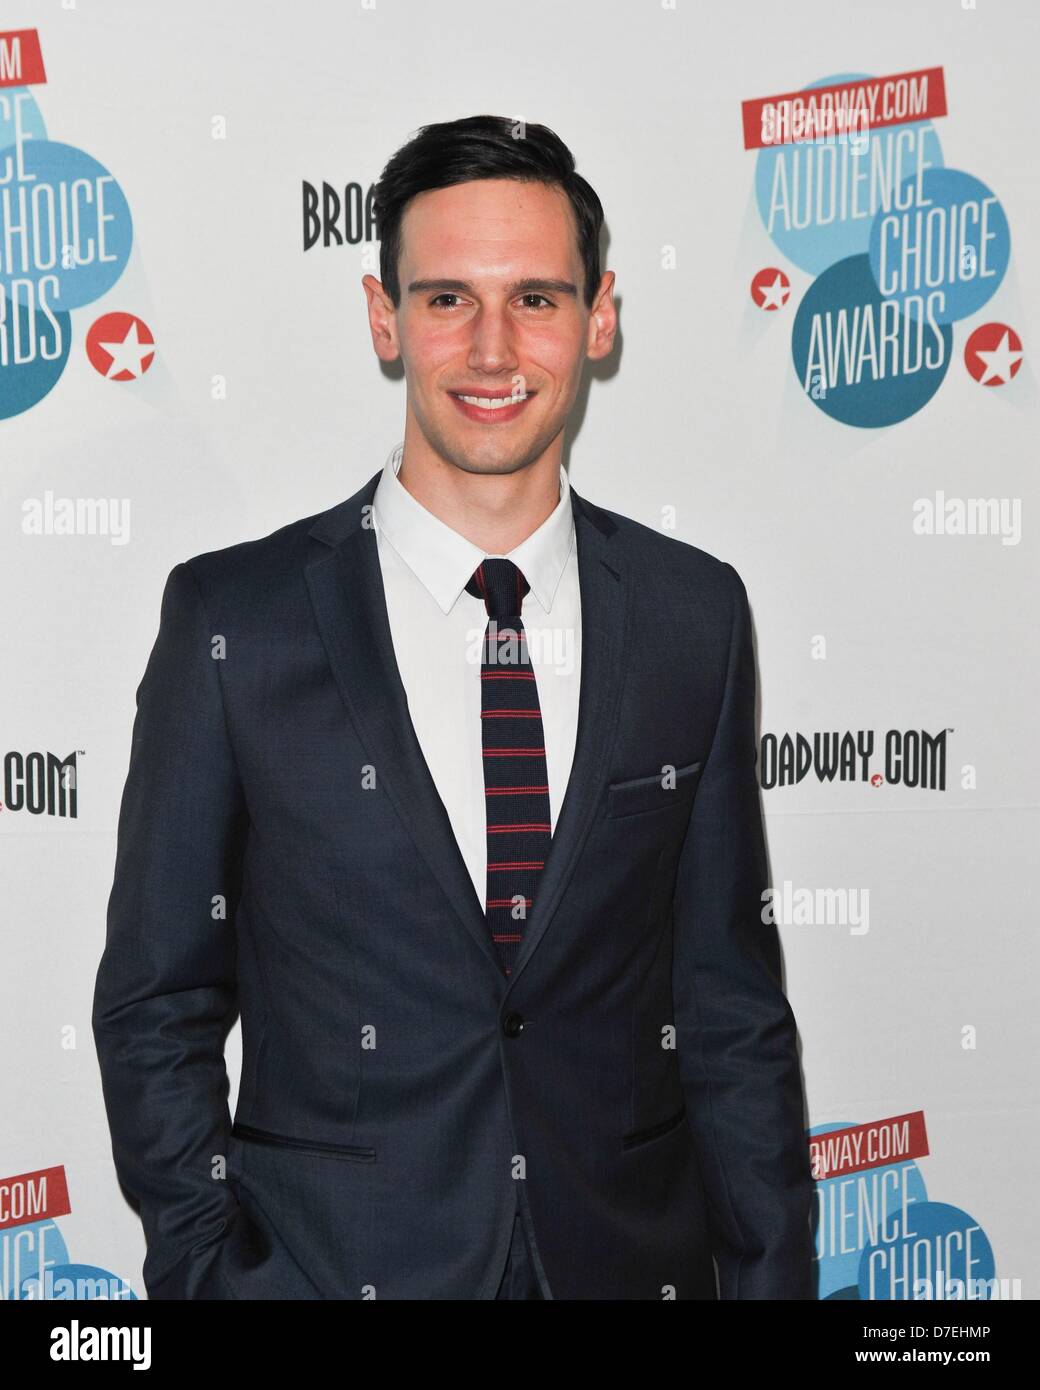 New York, USA. 5th May, 2013. Cory Michael Smith at arrivals for The 2013 Broadway.com Audience Choice Awards, Frederick P. Rose Hall, Jazz at Lincoln Center, New York, NY May 5, 2013. Photo By: John Paul Melendez/Everett Collection/Alamy Live News Stock Photo